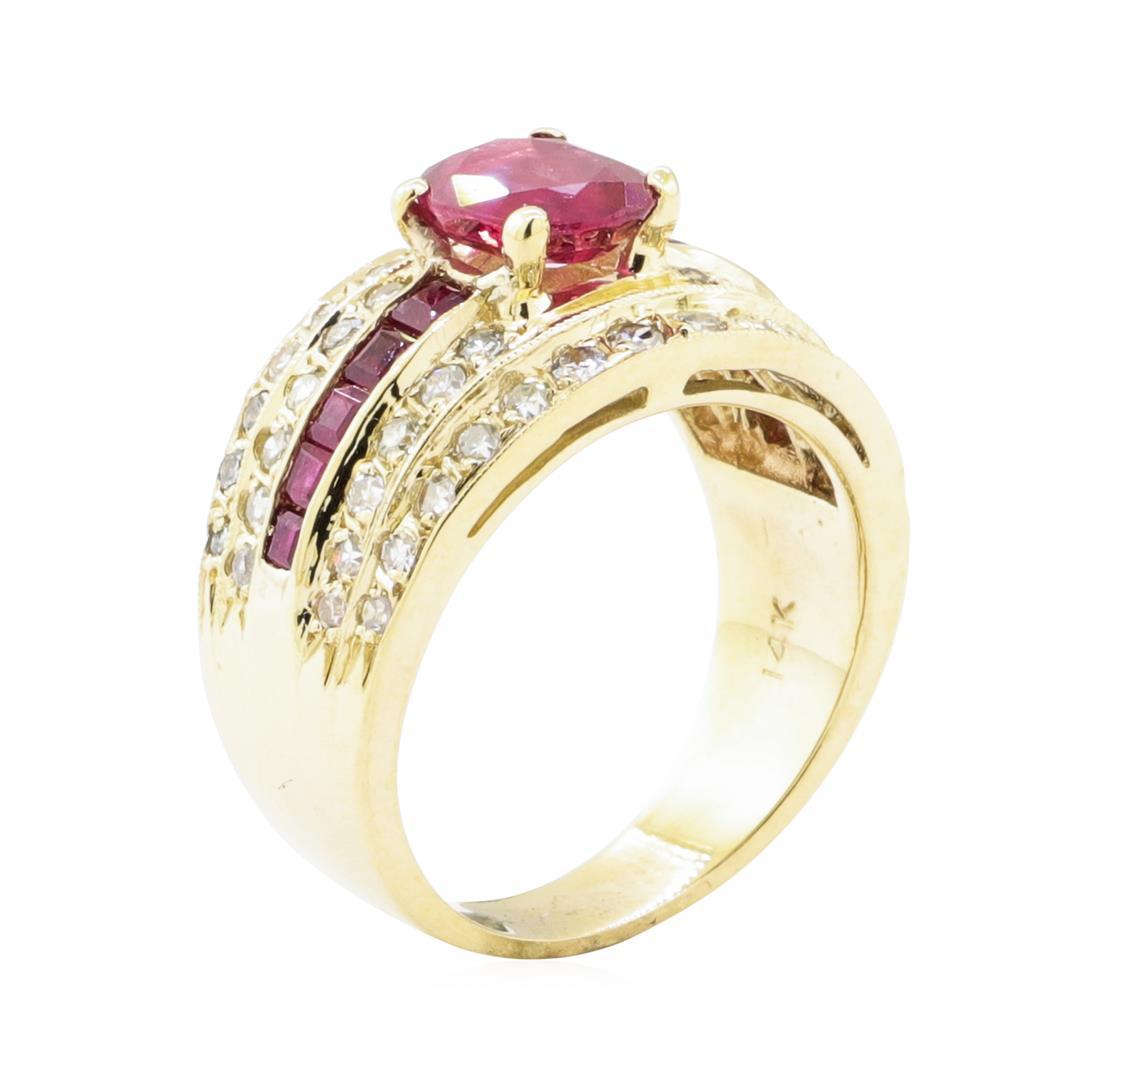 2.50 ctw Ruby and Diamond Ring - 14KT Yellow Gold